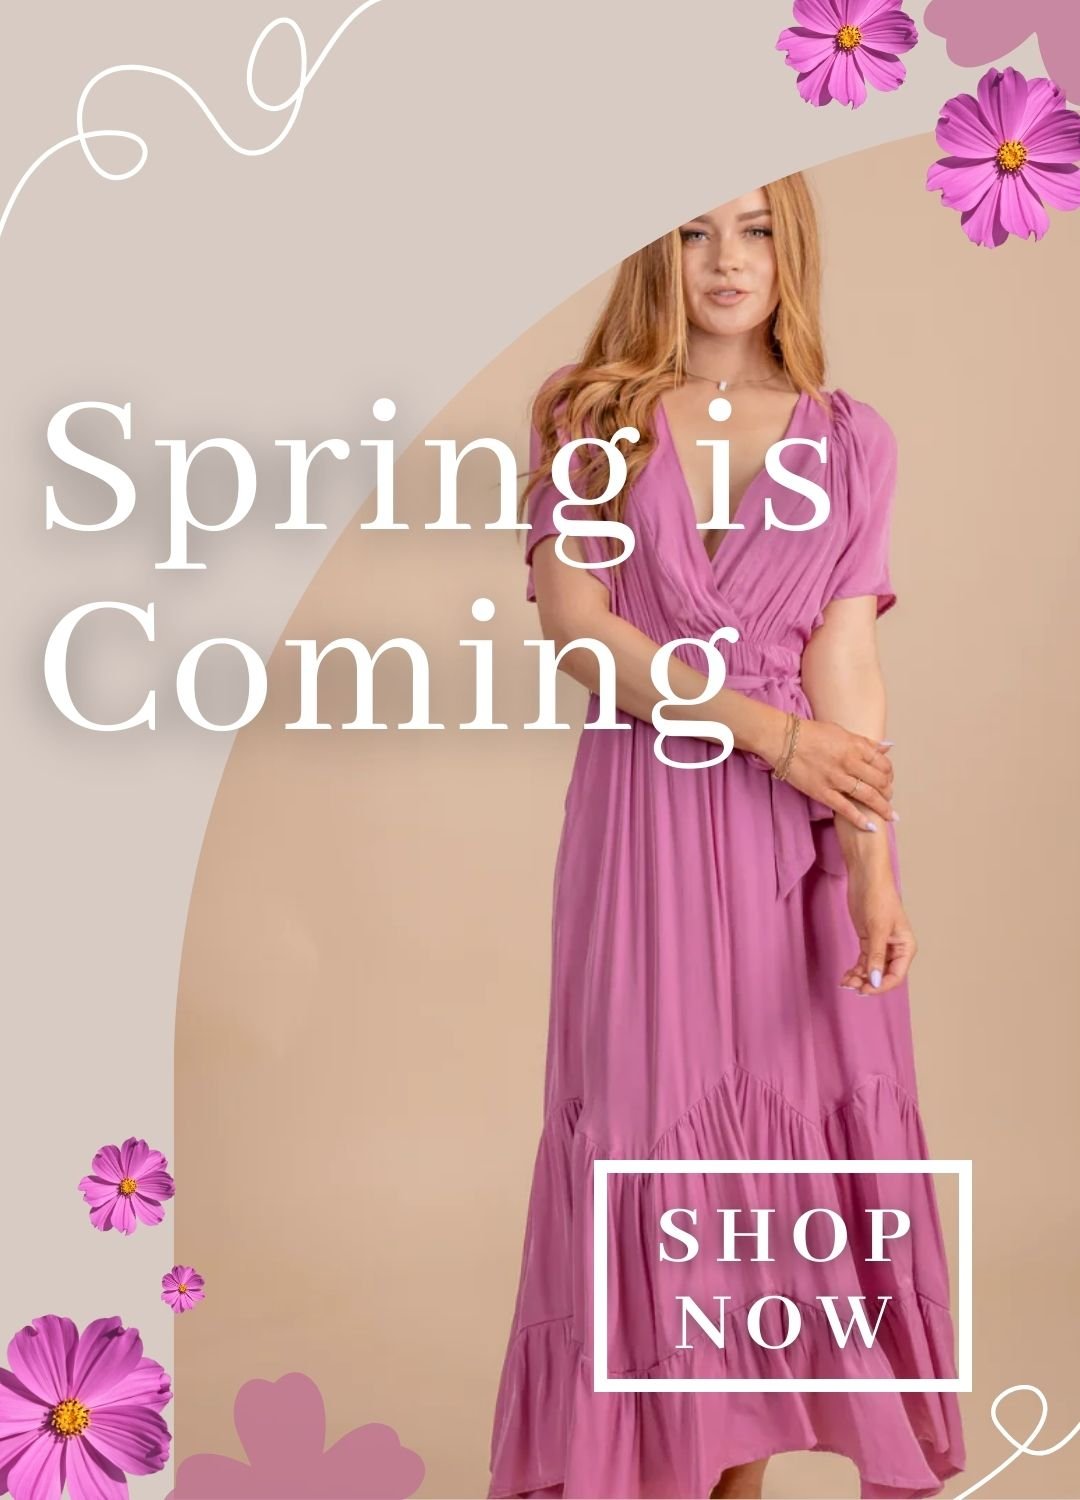 There is a model wearing a pink dress with tiers and a v neckline. The model is in a curved frame part of the image and the background is tan and light tan. There are squiggles, purple flowers, and flower graphics in the corners and there is a white box that says shop now. There is text that says spring is coming.